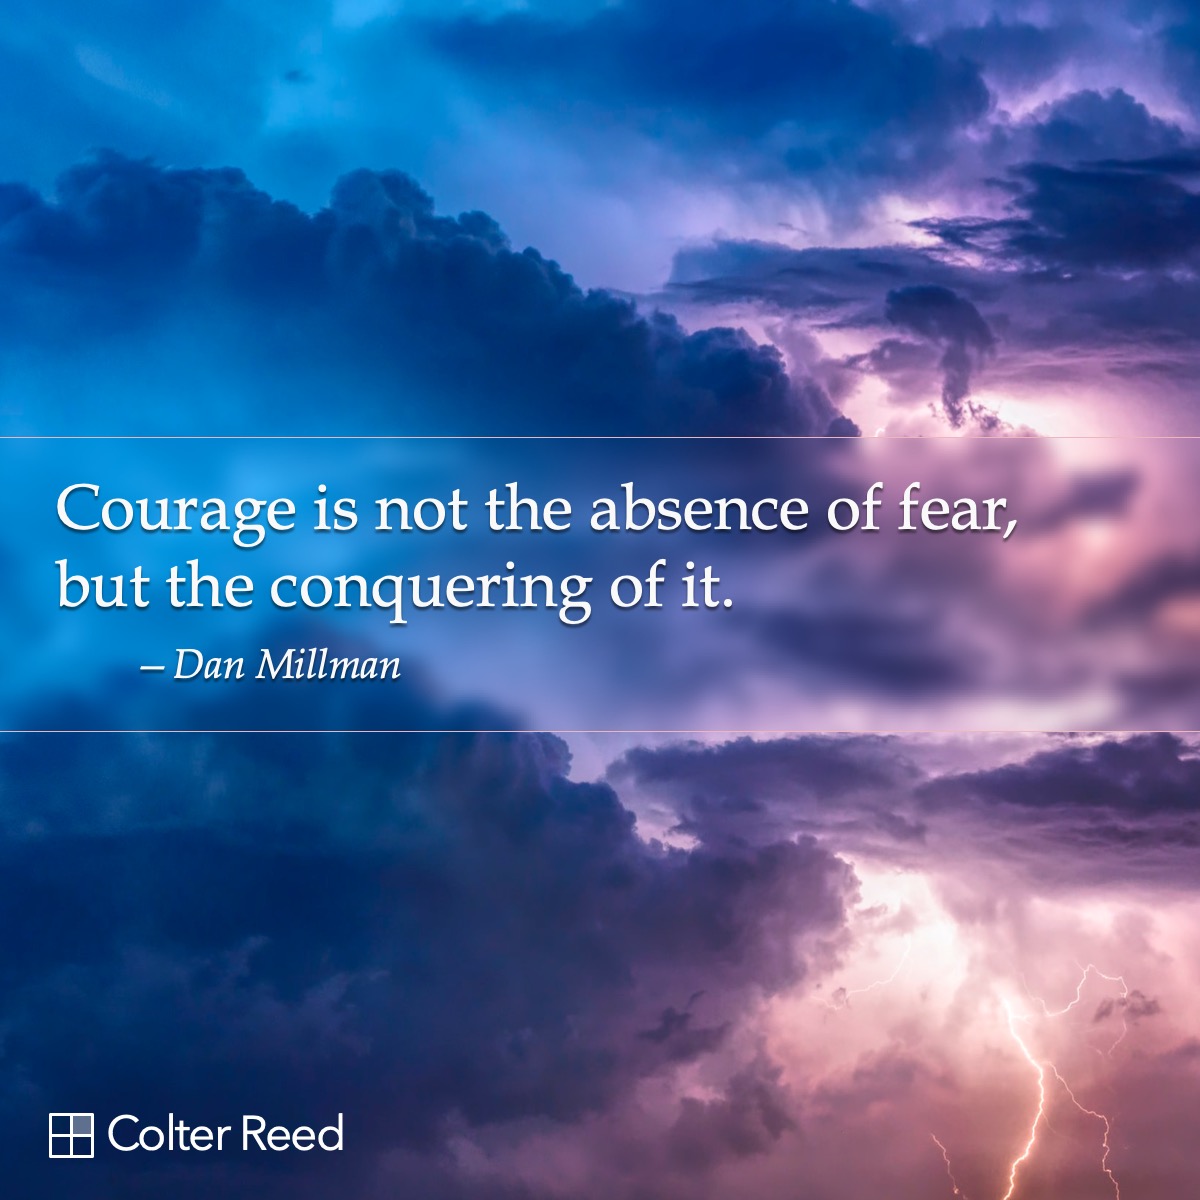 Courage is not the absence of fear, but the conquering of it. —Dan Millman